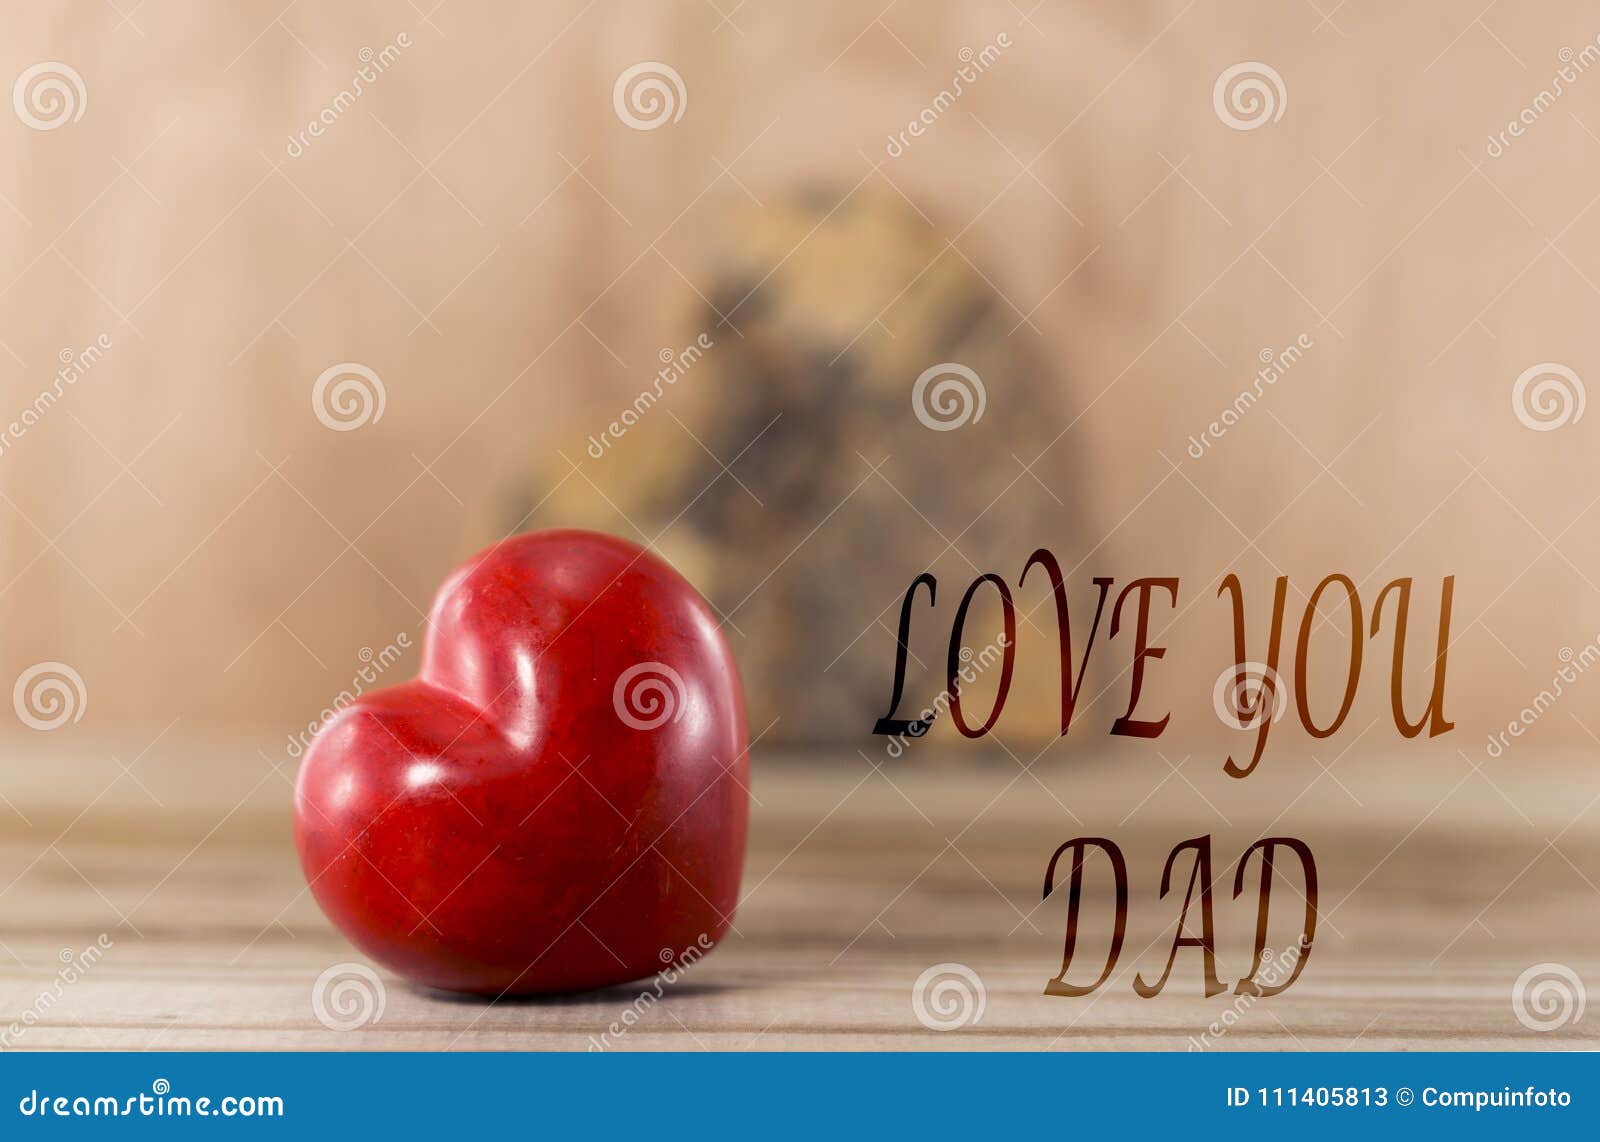 Fathers day love you dad stock image. Image of texture - 111405813